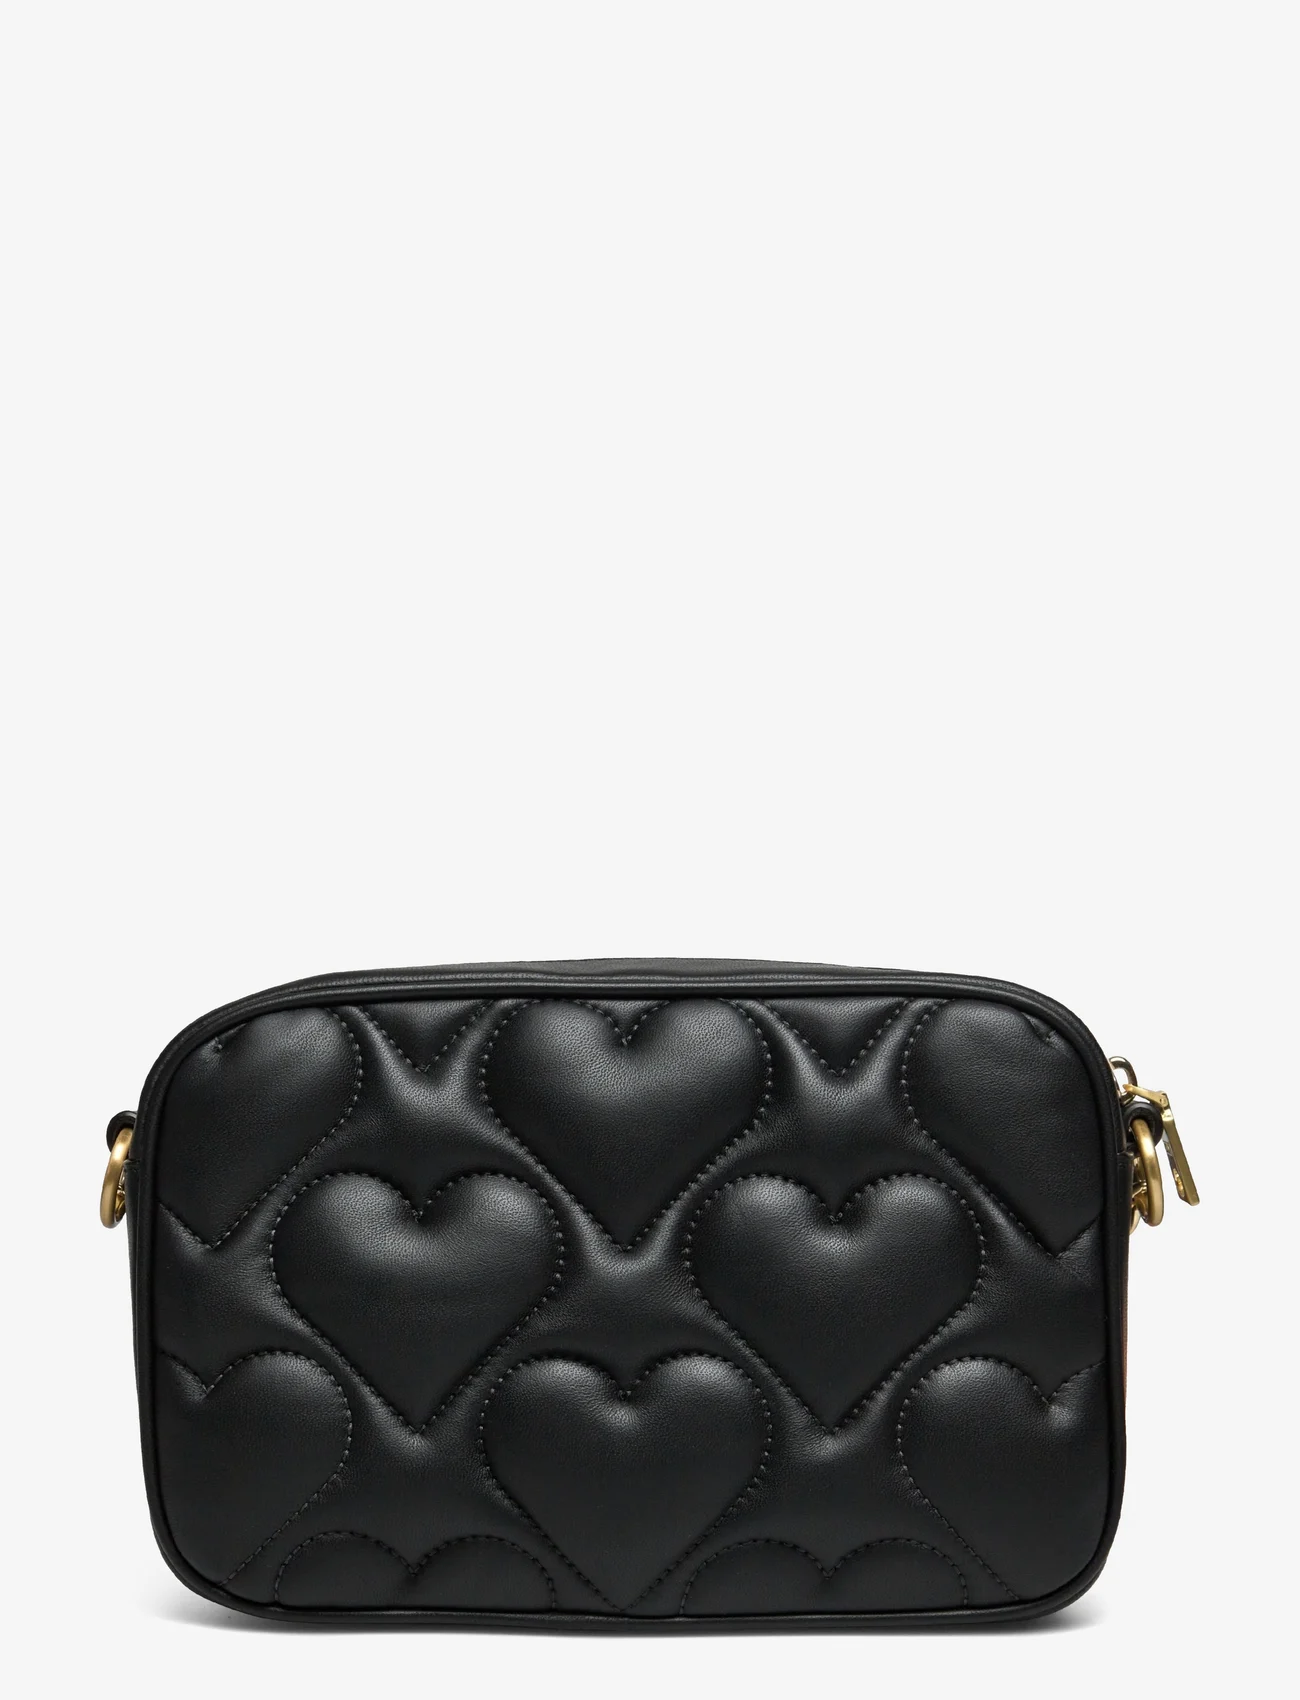 DKNY Bags - HEART OF NY QUILTED BAG - confirmation - bgd - blk/gold - 1